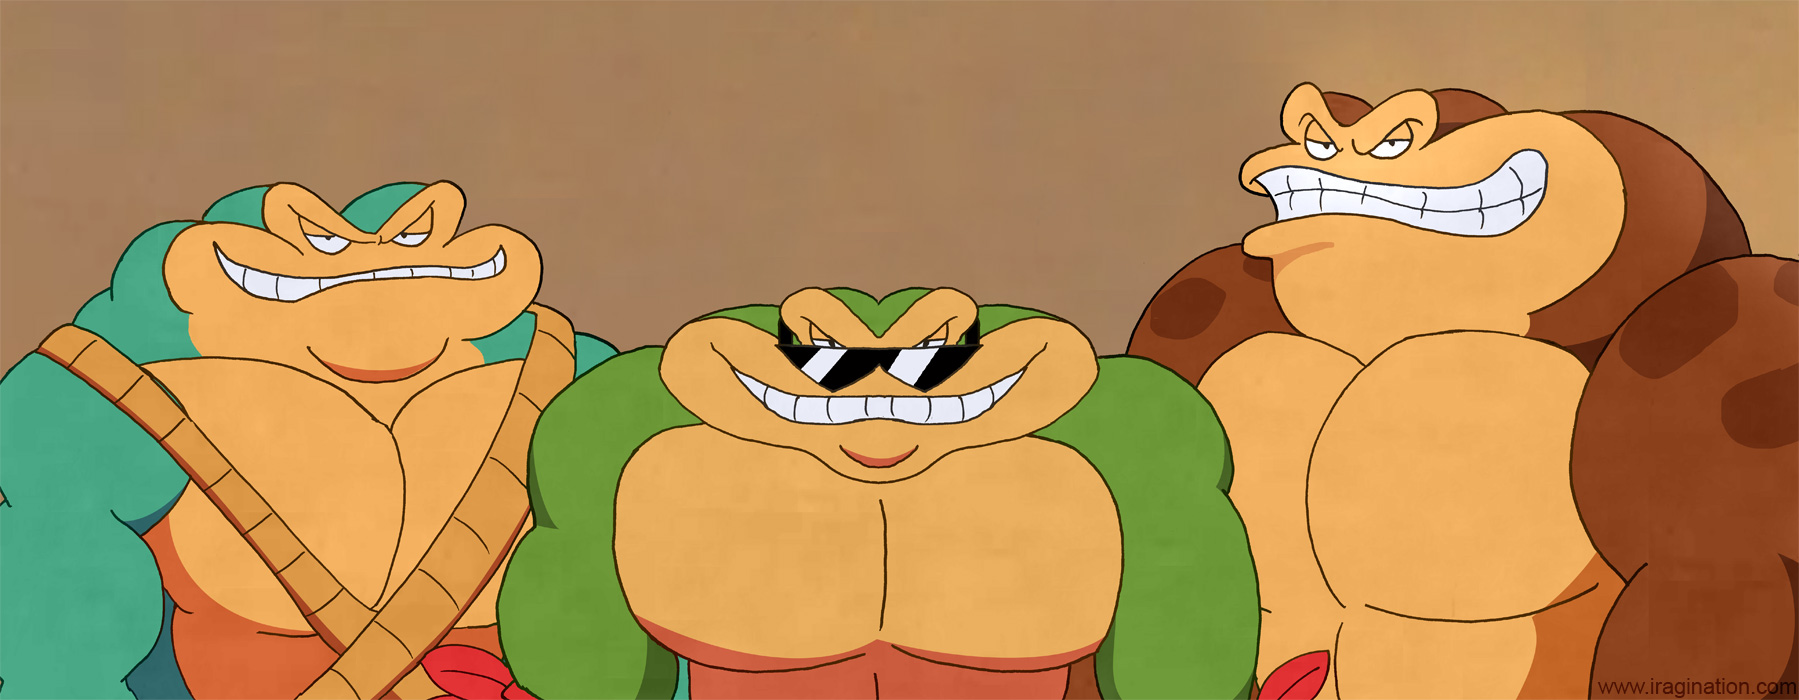 Me and the boys - Battletoads
E3 2019 finally revealed gameplay of the new [url=https://youtu.be/xyJI_uFRZSY]Battletoads game for Xbox One[/url]. While the new art style is not much of my preference, I gave it a shot mixing it a bit with the style of the 90's. Apparently the new game if full hand drawn, which must be a great effort and costly. I can really appreciate that and hopefully the game is good.

For some reason Battletoads never took off as TMNT. I beat the original NES game back then only to find out years later how much of a traumatic experience it was for many players because of its difficulty. I don't know, I guess I had lots of free time back then. It was really difficult, but hilarious at the same time. I remember magazines praising it for its graphics, and it was well deserved. I became a big fan and I was looking forward for new games for years. I also beat Battlemaniacs and Battletoads & Double Dragon. 

Not sure what happened. No comics, no cartoons. There is a [url=https://youtu.be/mtQ_RSF1jYU]cartoon pilot[/url] on Youtube which I find charming today, but back then I might have rejected immediately. I guess I would have expected something less campy, but not with the gore of the [url=https://youtu.be/-LJ7XNtHzdA]arcade game[/url]. Anyway, looking forward to what they do with this new adaptation.

Oh, and for those who love memes here is the [url=https://knowyourmeme.com/memes/me-and-the-boys]source[/url].
Keywords: battletoads